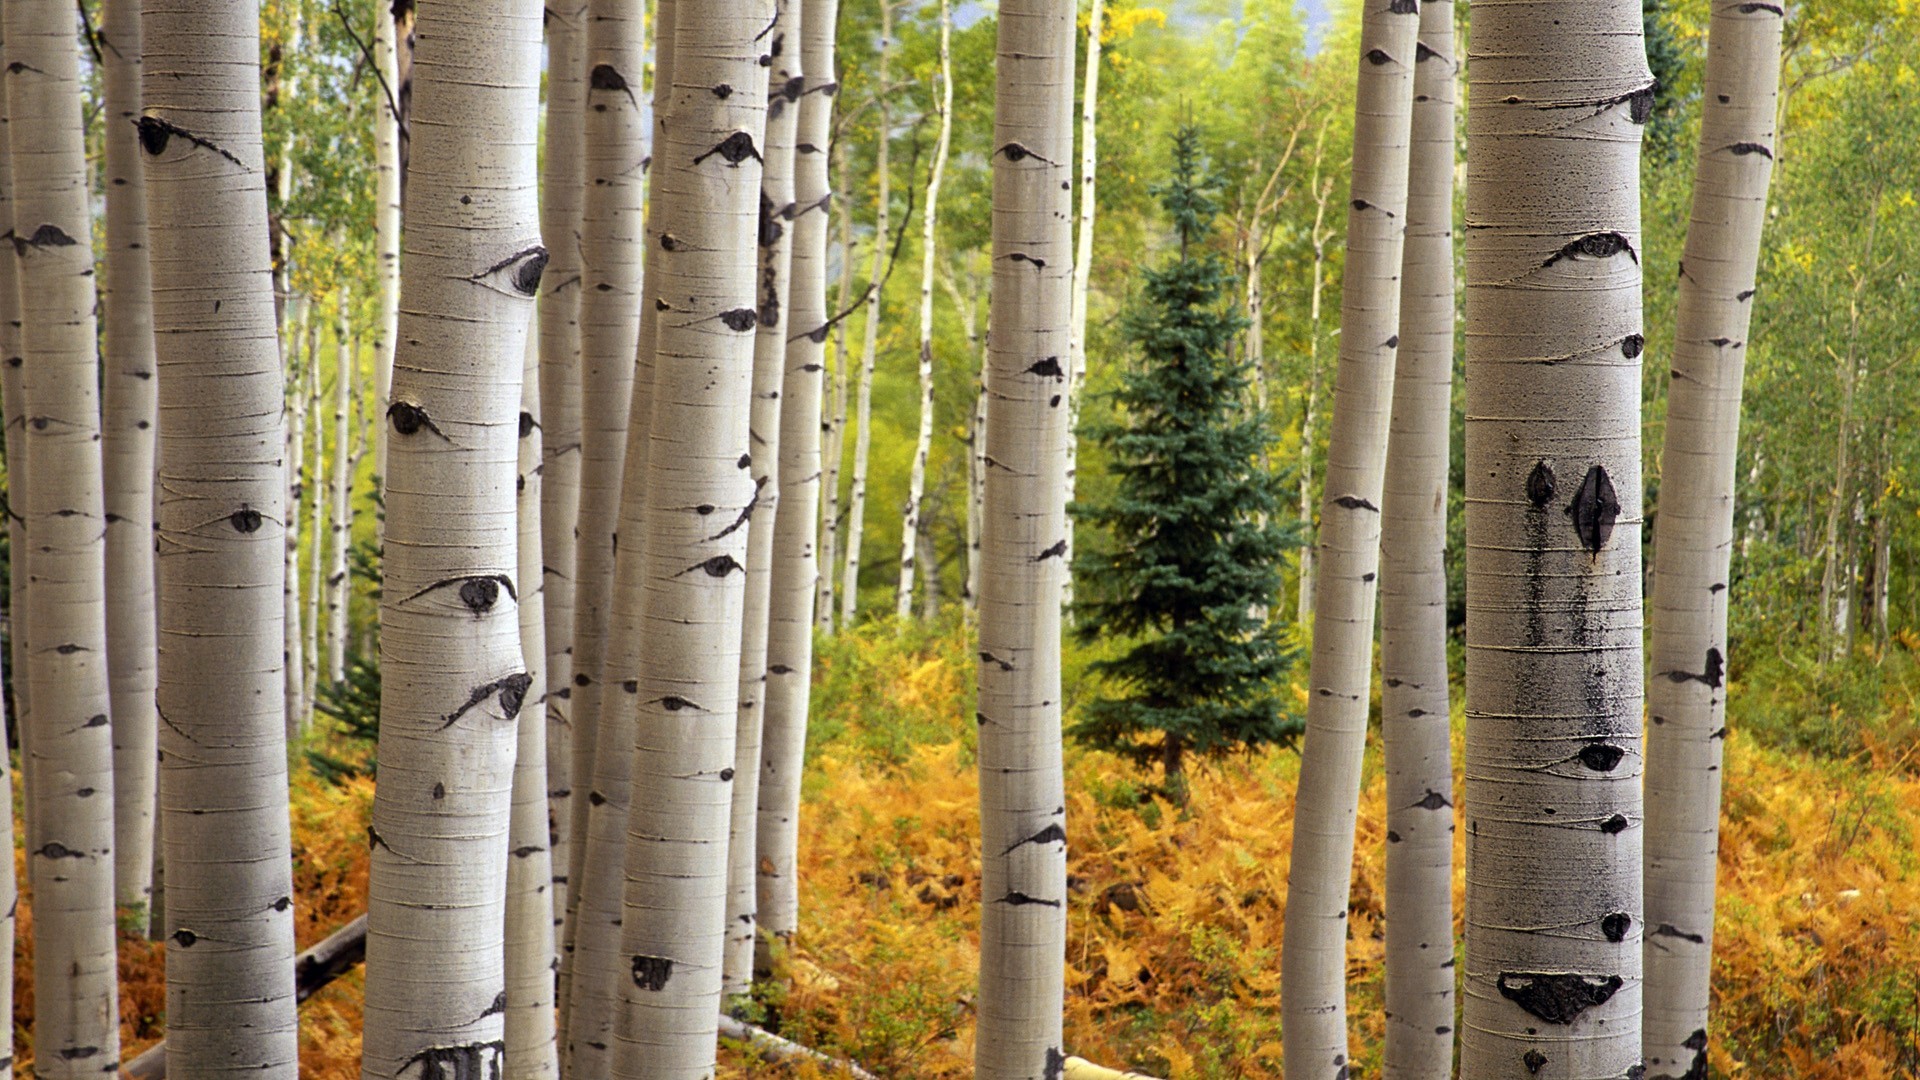 1920x1080 Of Aspens and Envy Dauntless Grace Ministries 